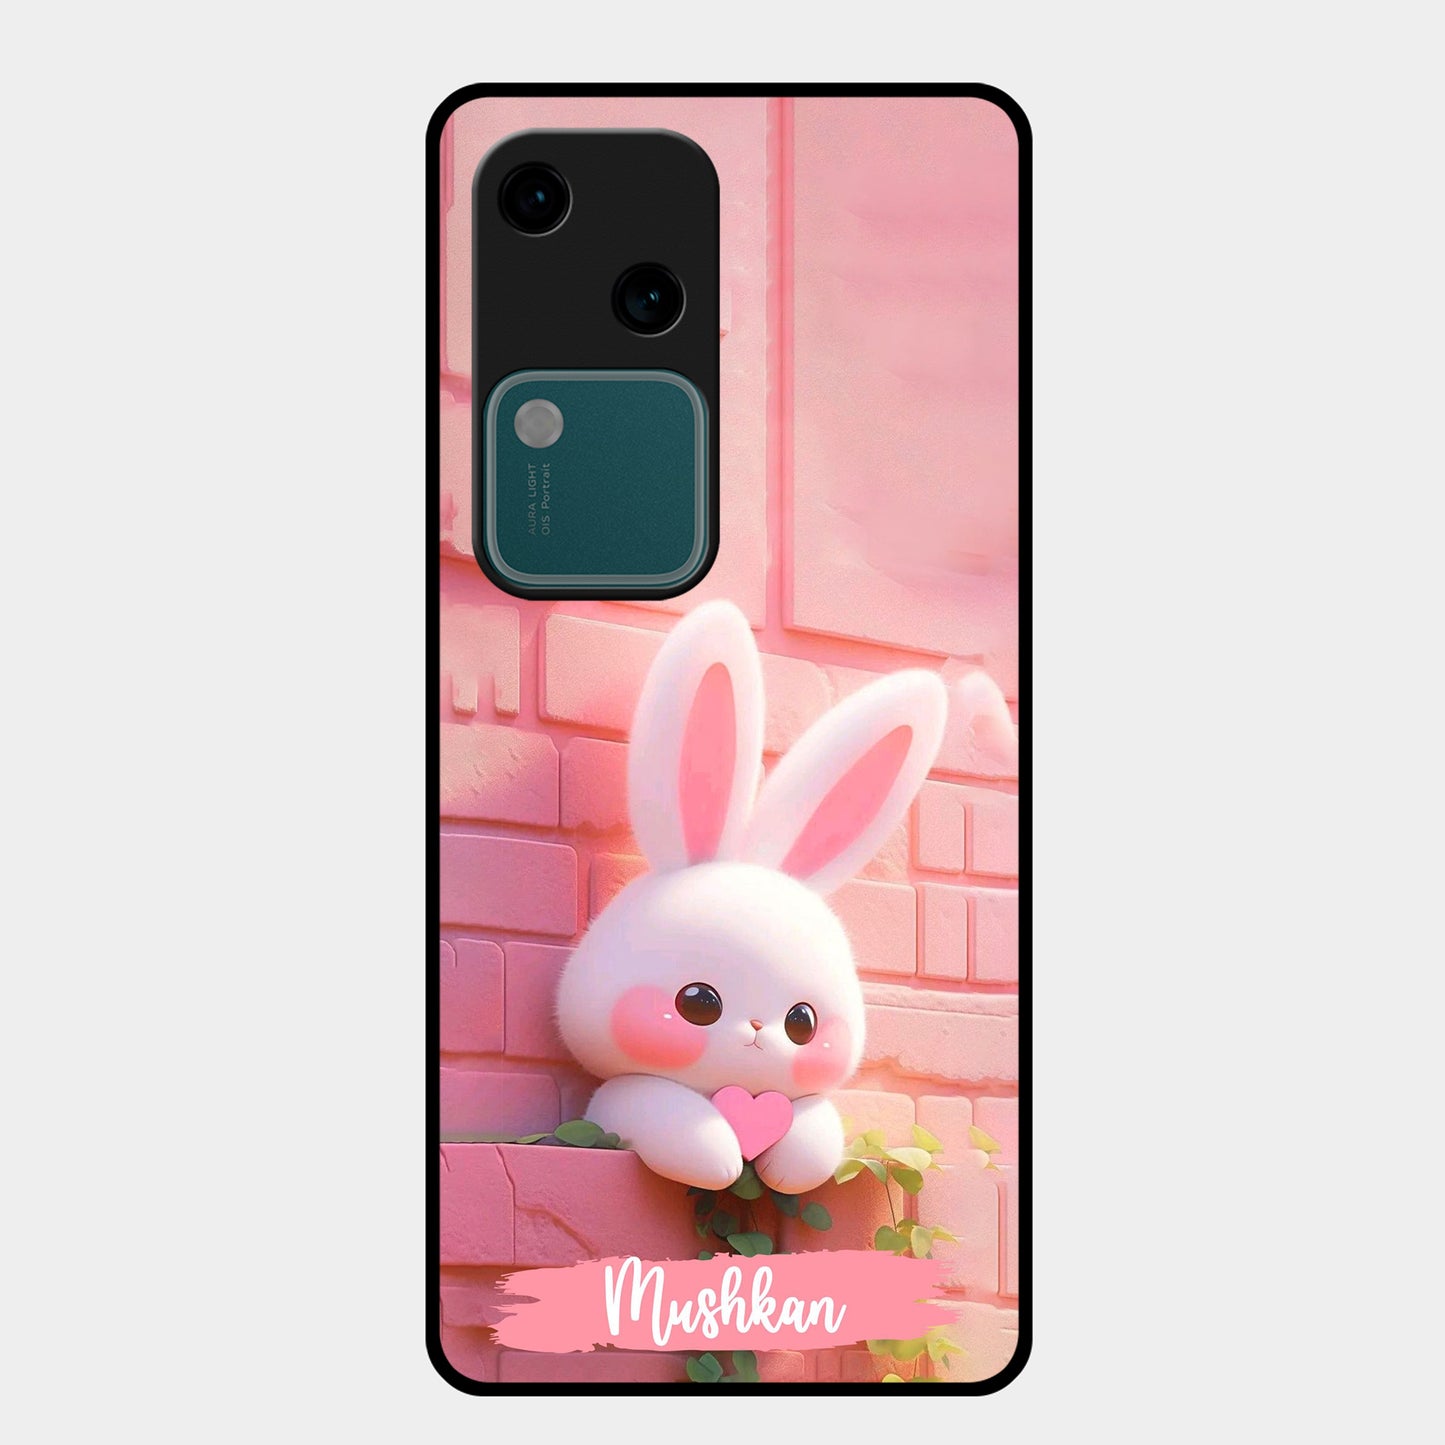 Bunny Glossy Metal Case Cover For Vivo